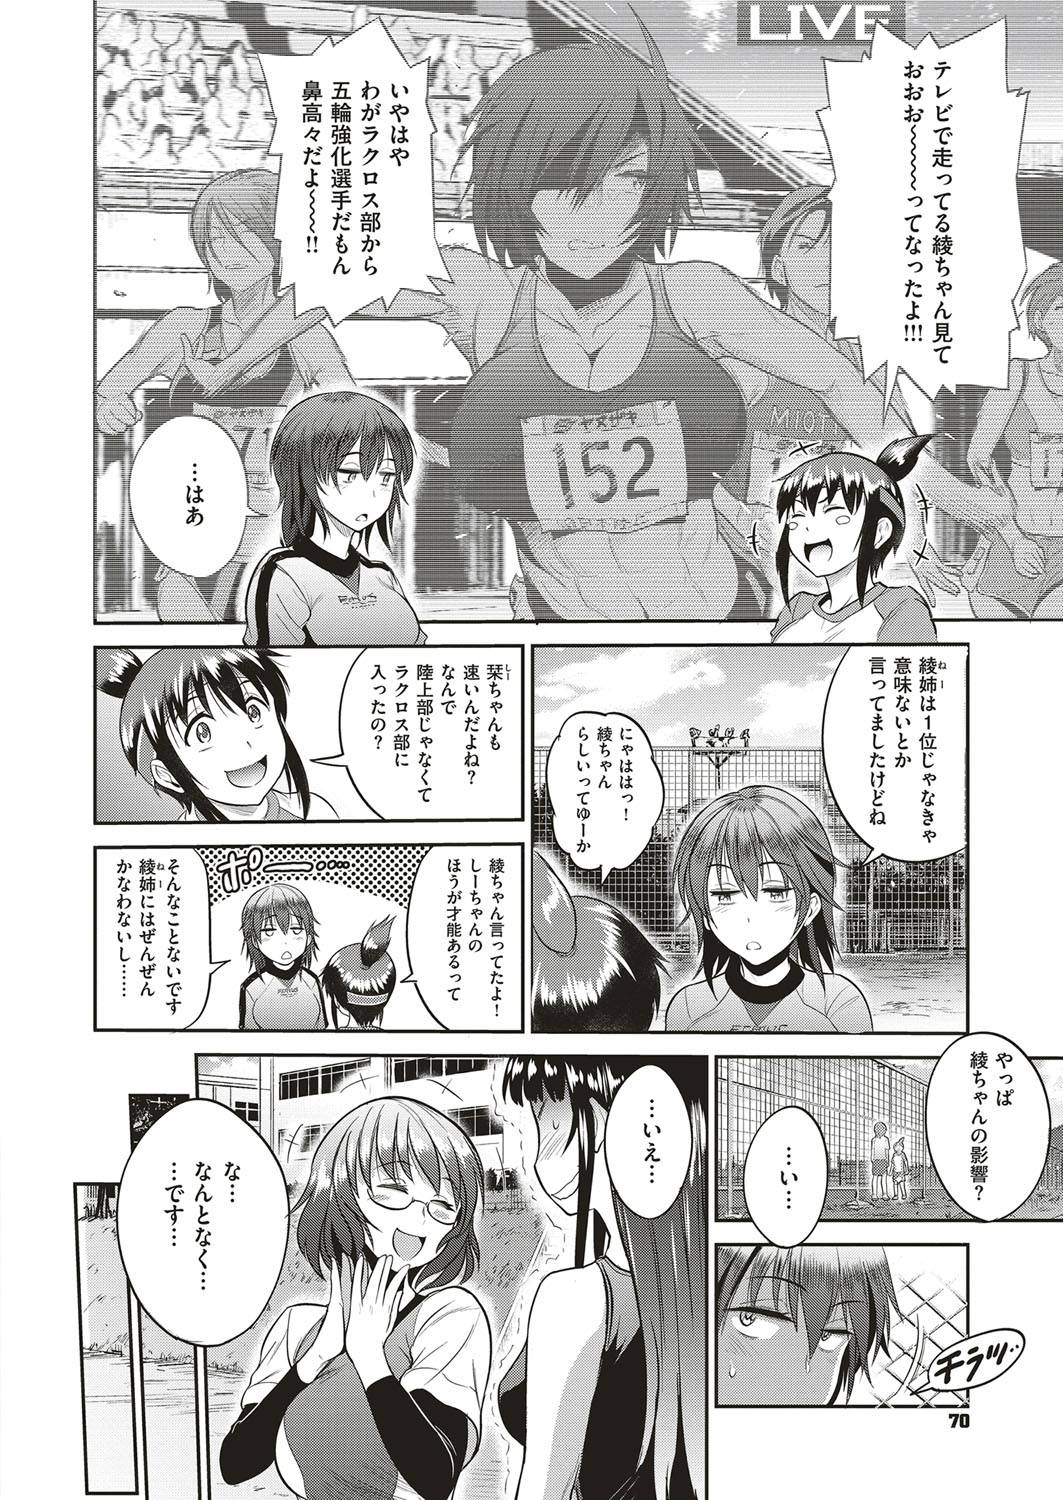 DISTANCE-Joshi Lacu! - Girls Lacrosse Club ~2 Years Later~ Ch.4 [Japanese] page 12 full